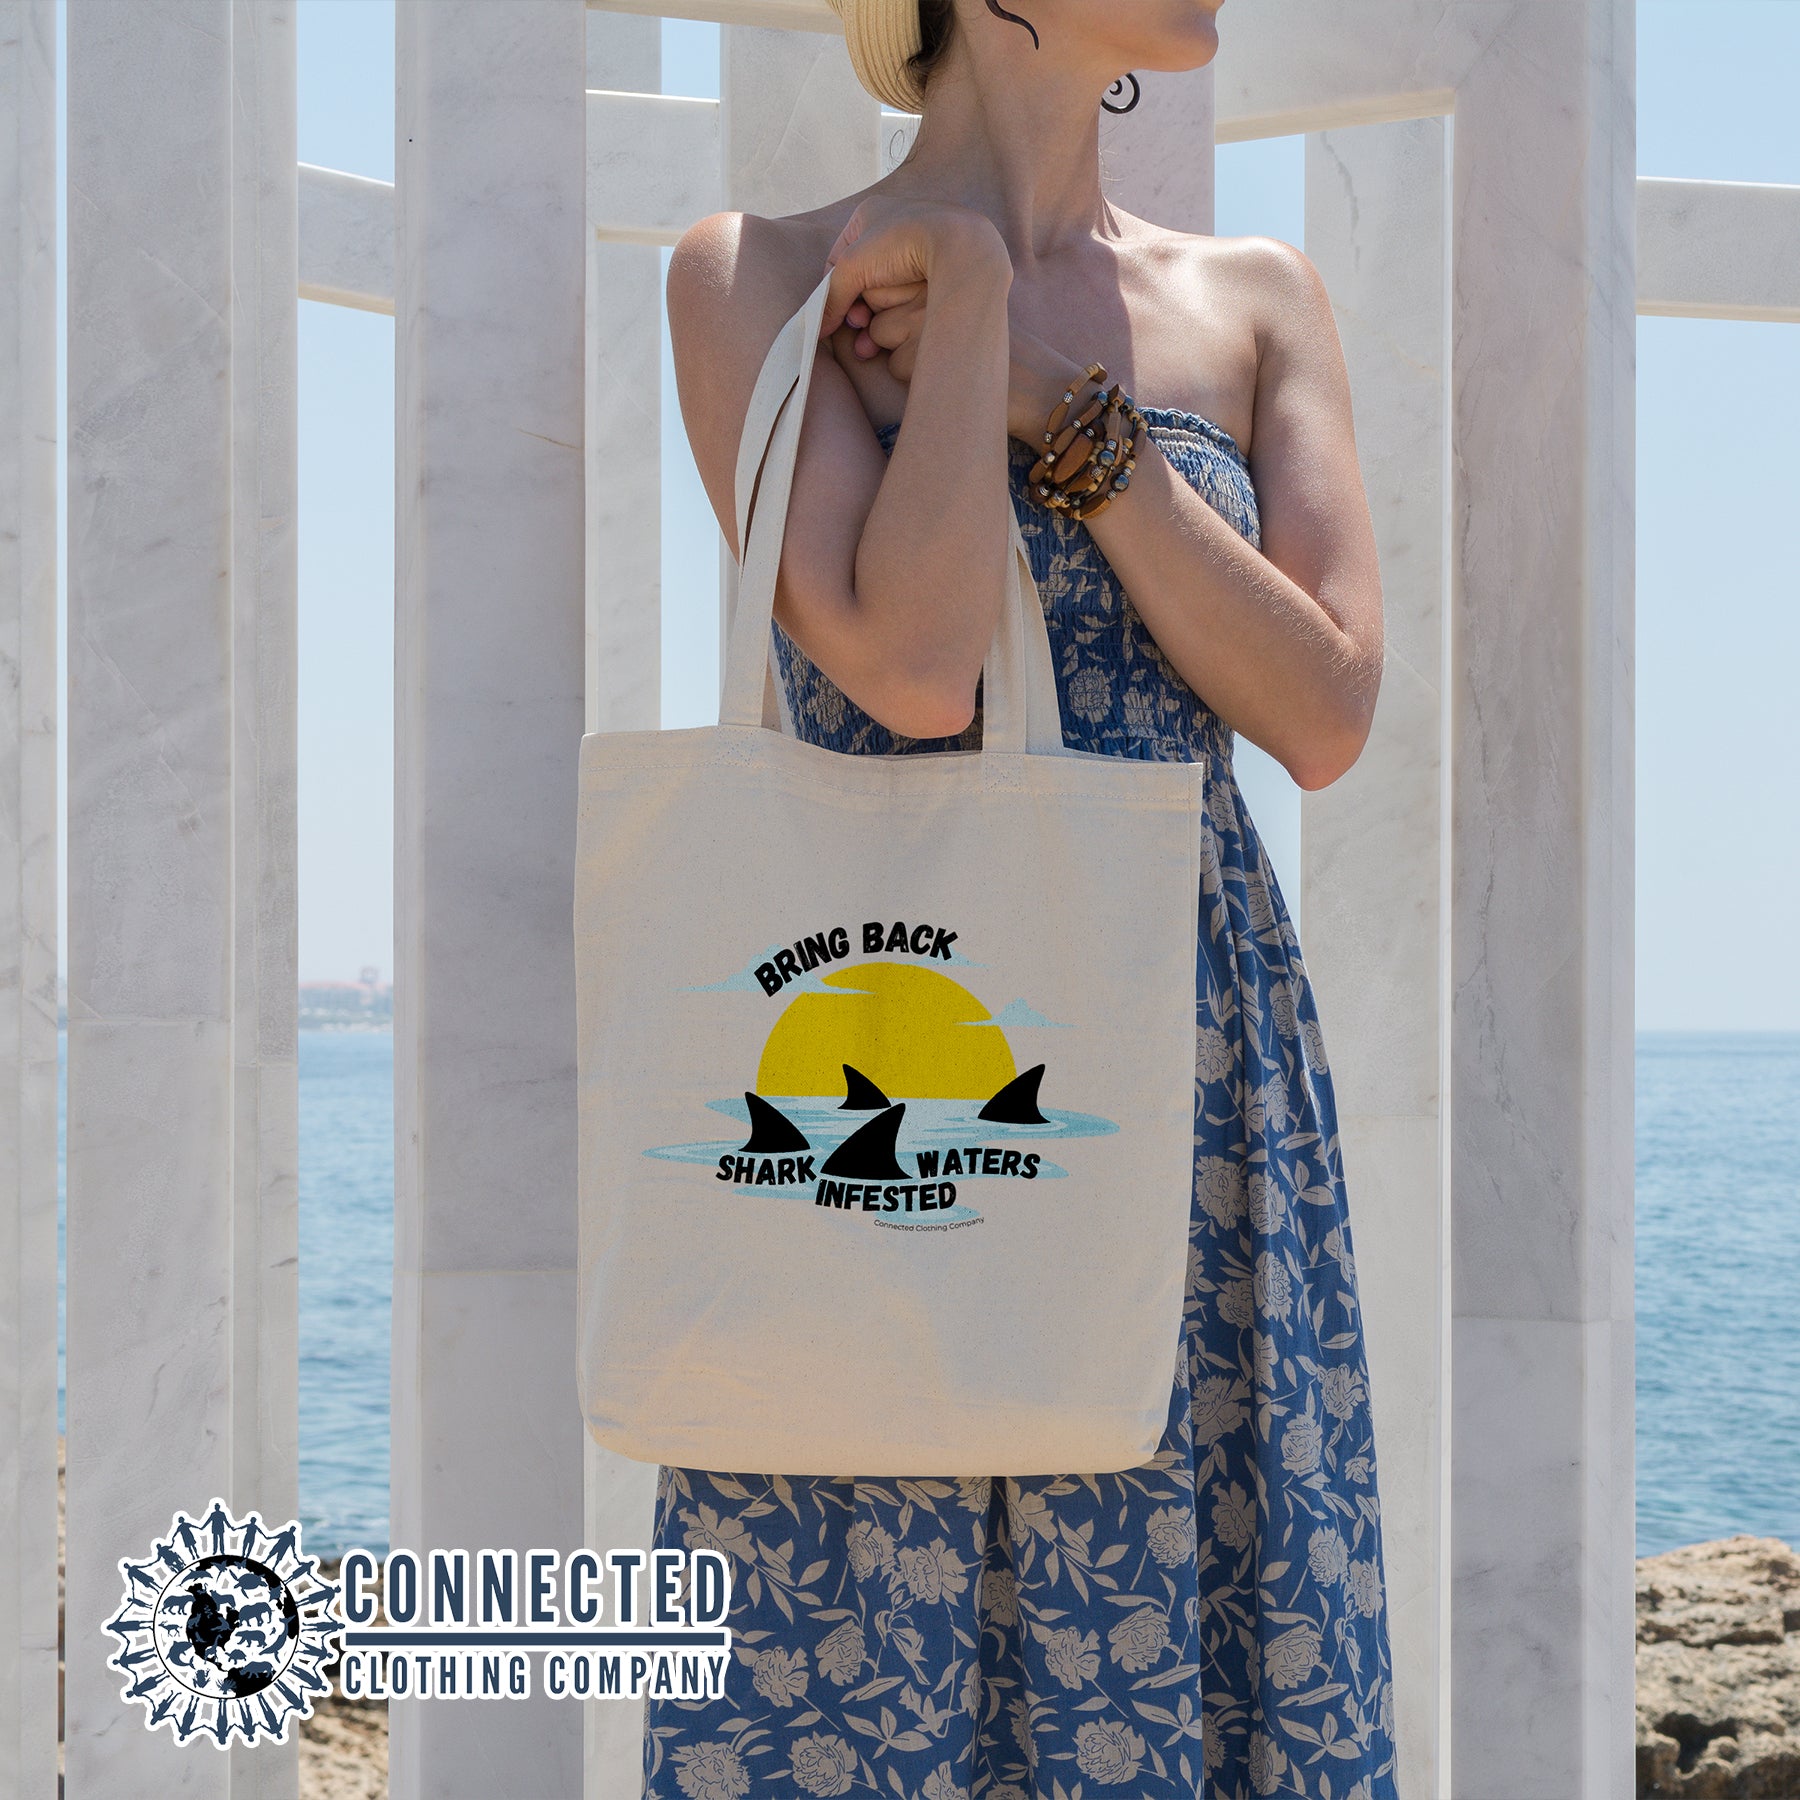 Shark Infested Waters Tote Bag - Connected Clothing Company - 10% of proceeds donated to shark conservation